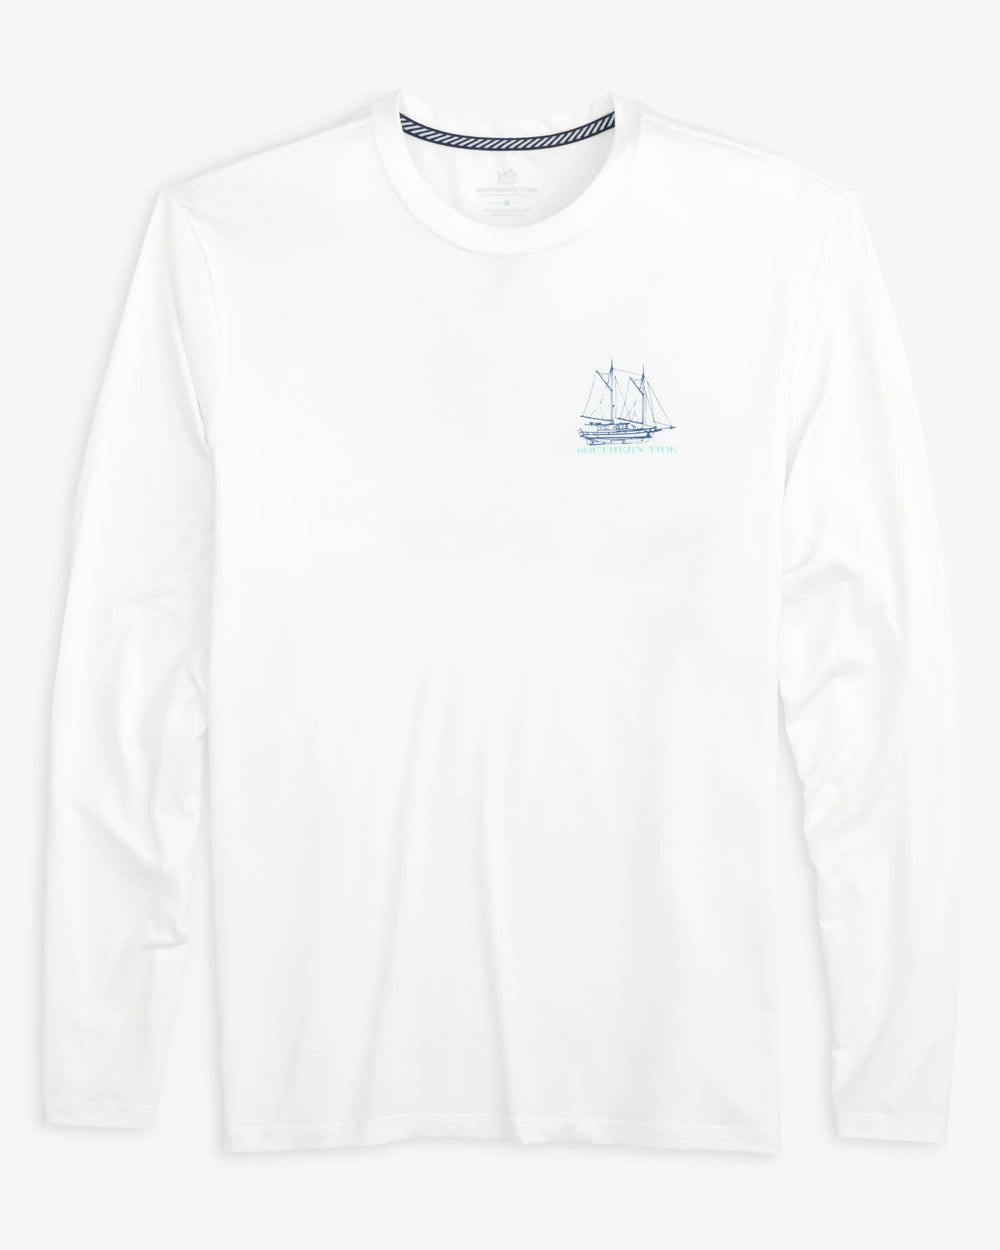 The front view of the Southern Tide Sail Boat Schematic Design Long Sleeve Performance T-Shirt by Southern Tide - Classic White